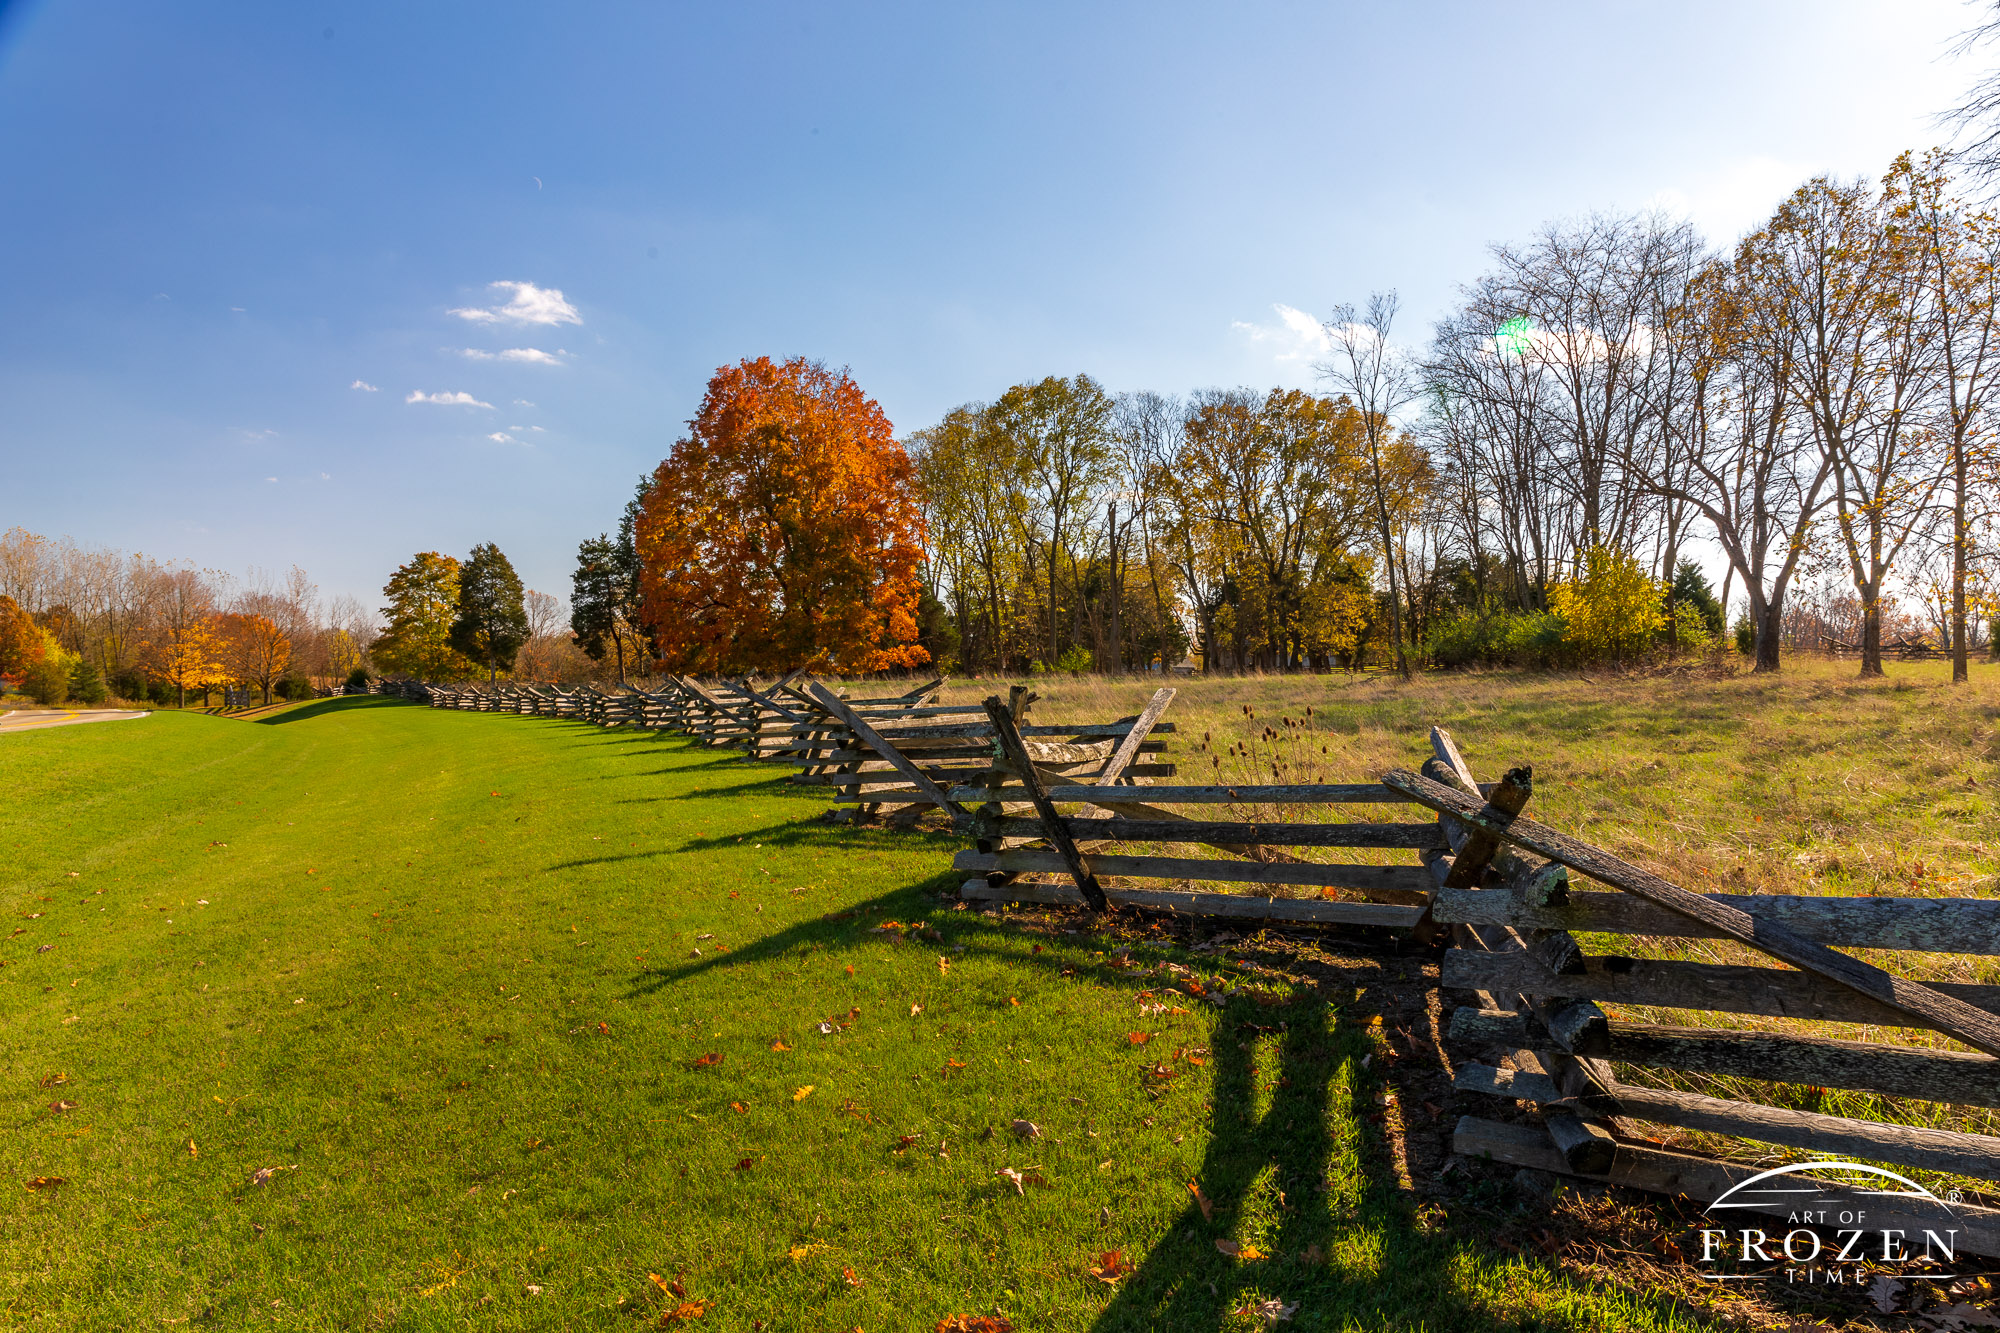 A stacked spilt-rail fence outlines the Historic Farmstead at Carriage Hill MetroPark